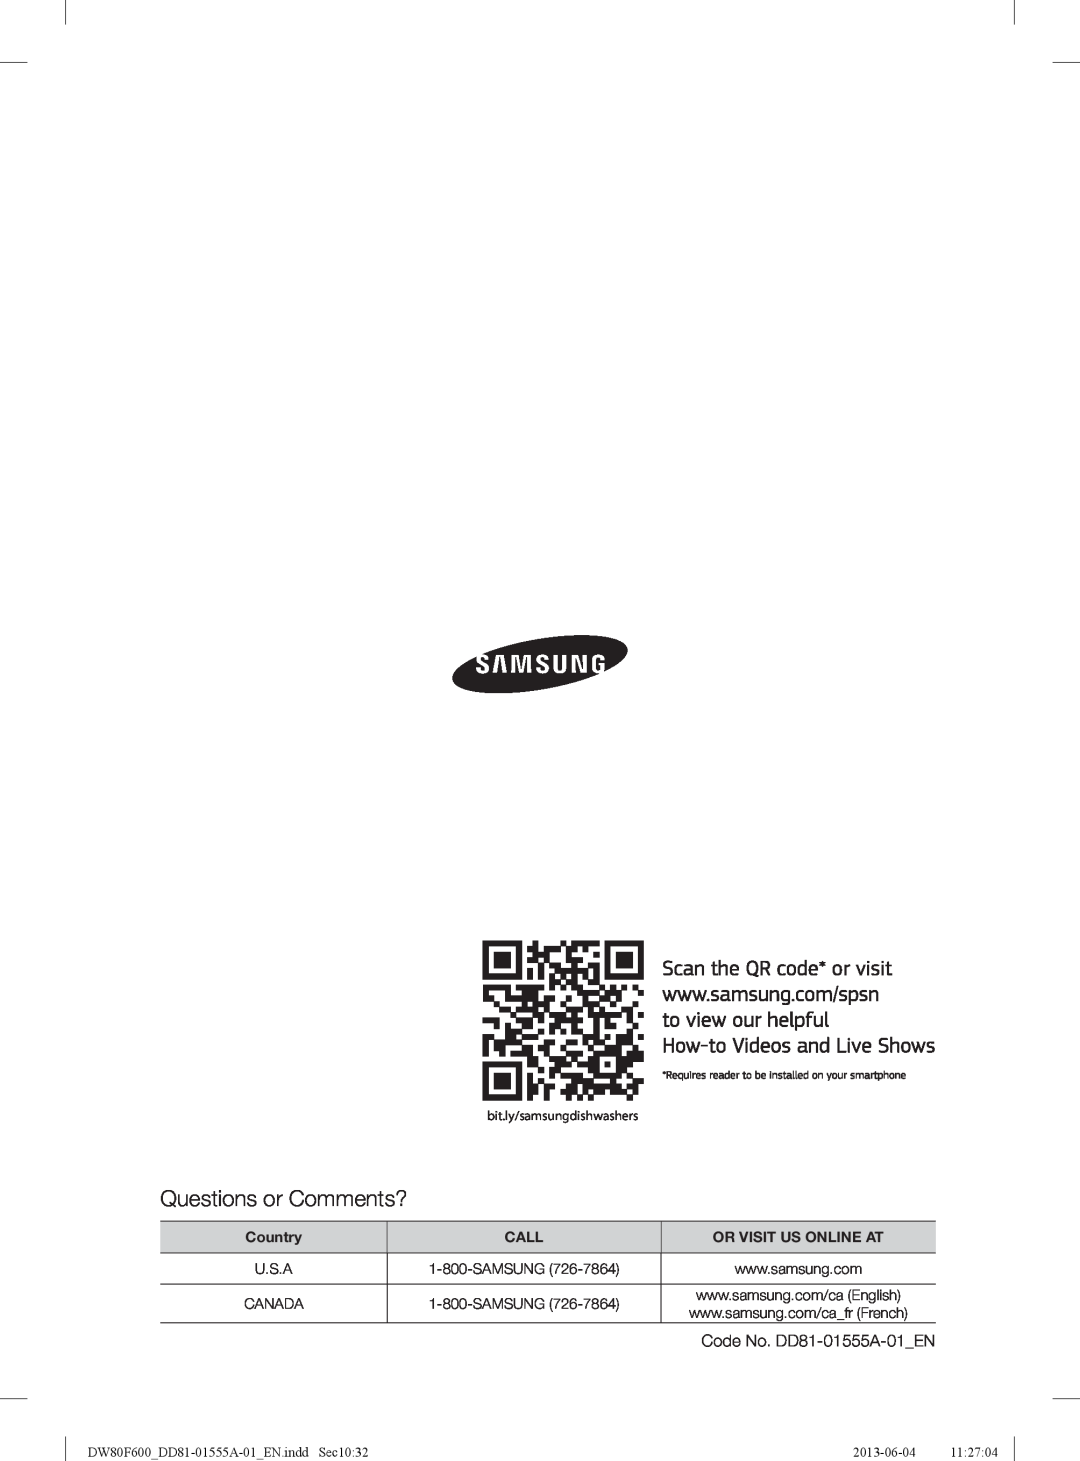 Samsung DW80F600UTS Questions or Comments?, Country, Call, Or Visit Us Online At, bit.ly/samsungdishwashers, 2013-06-04 